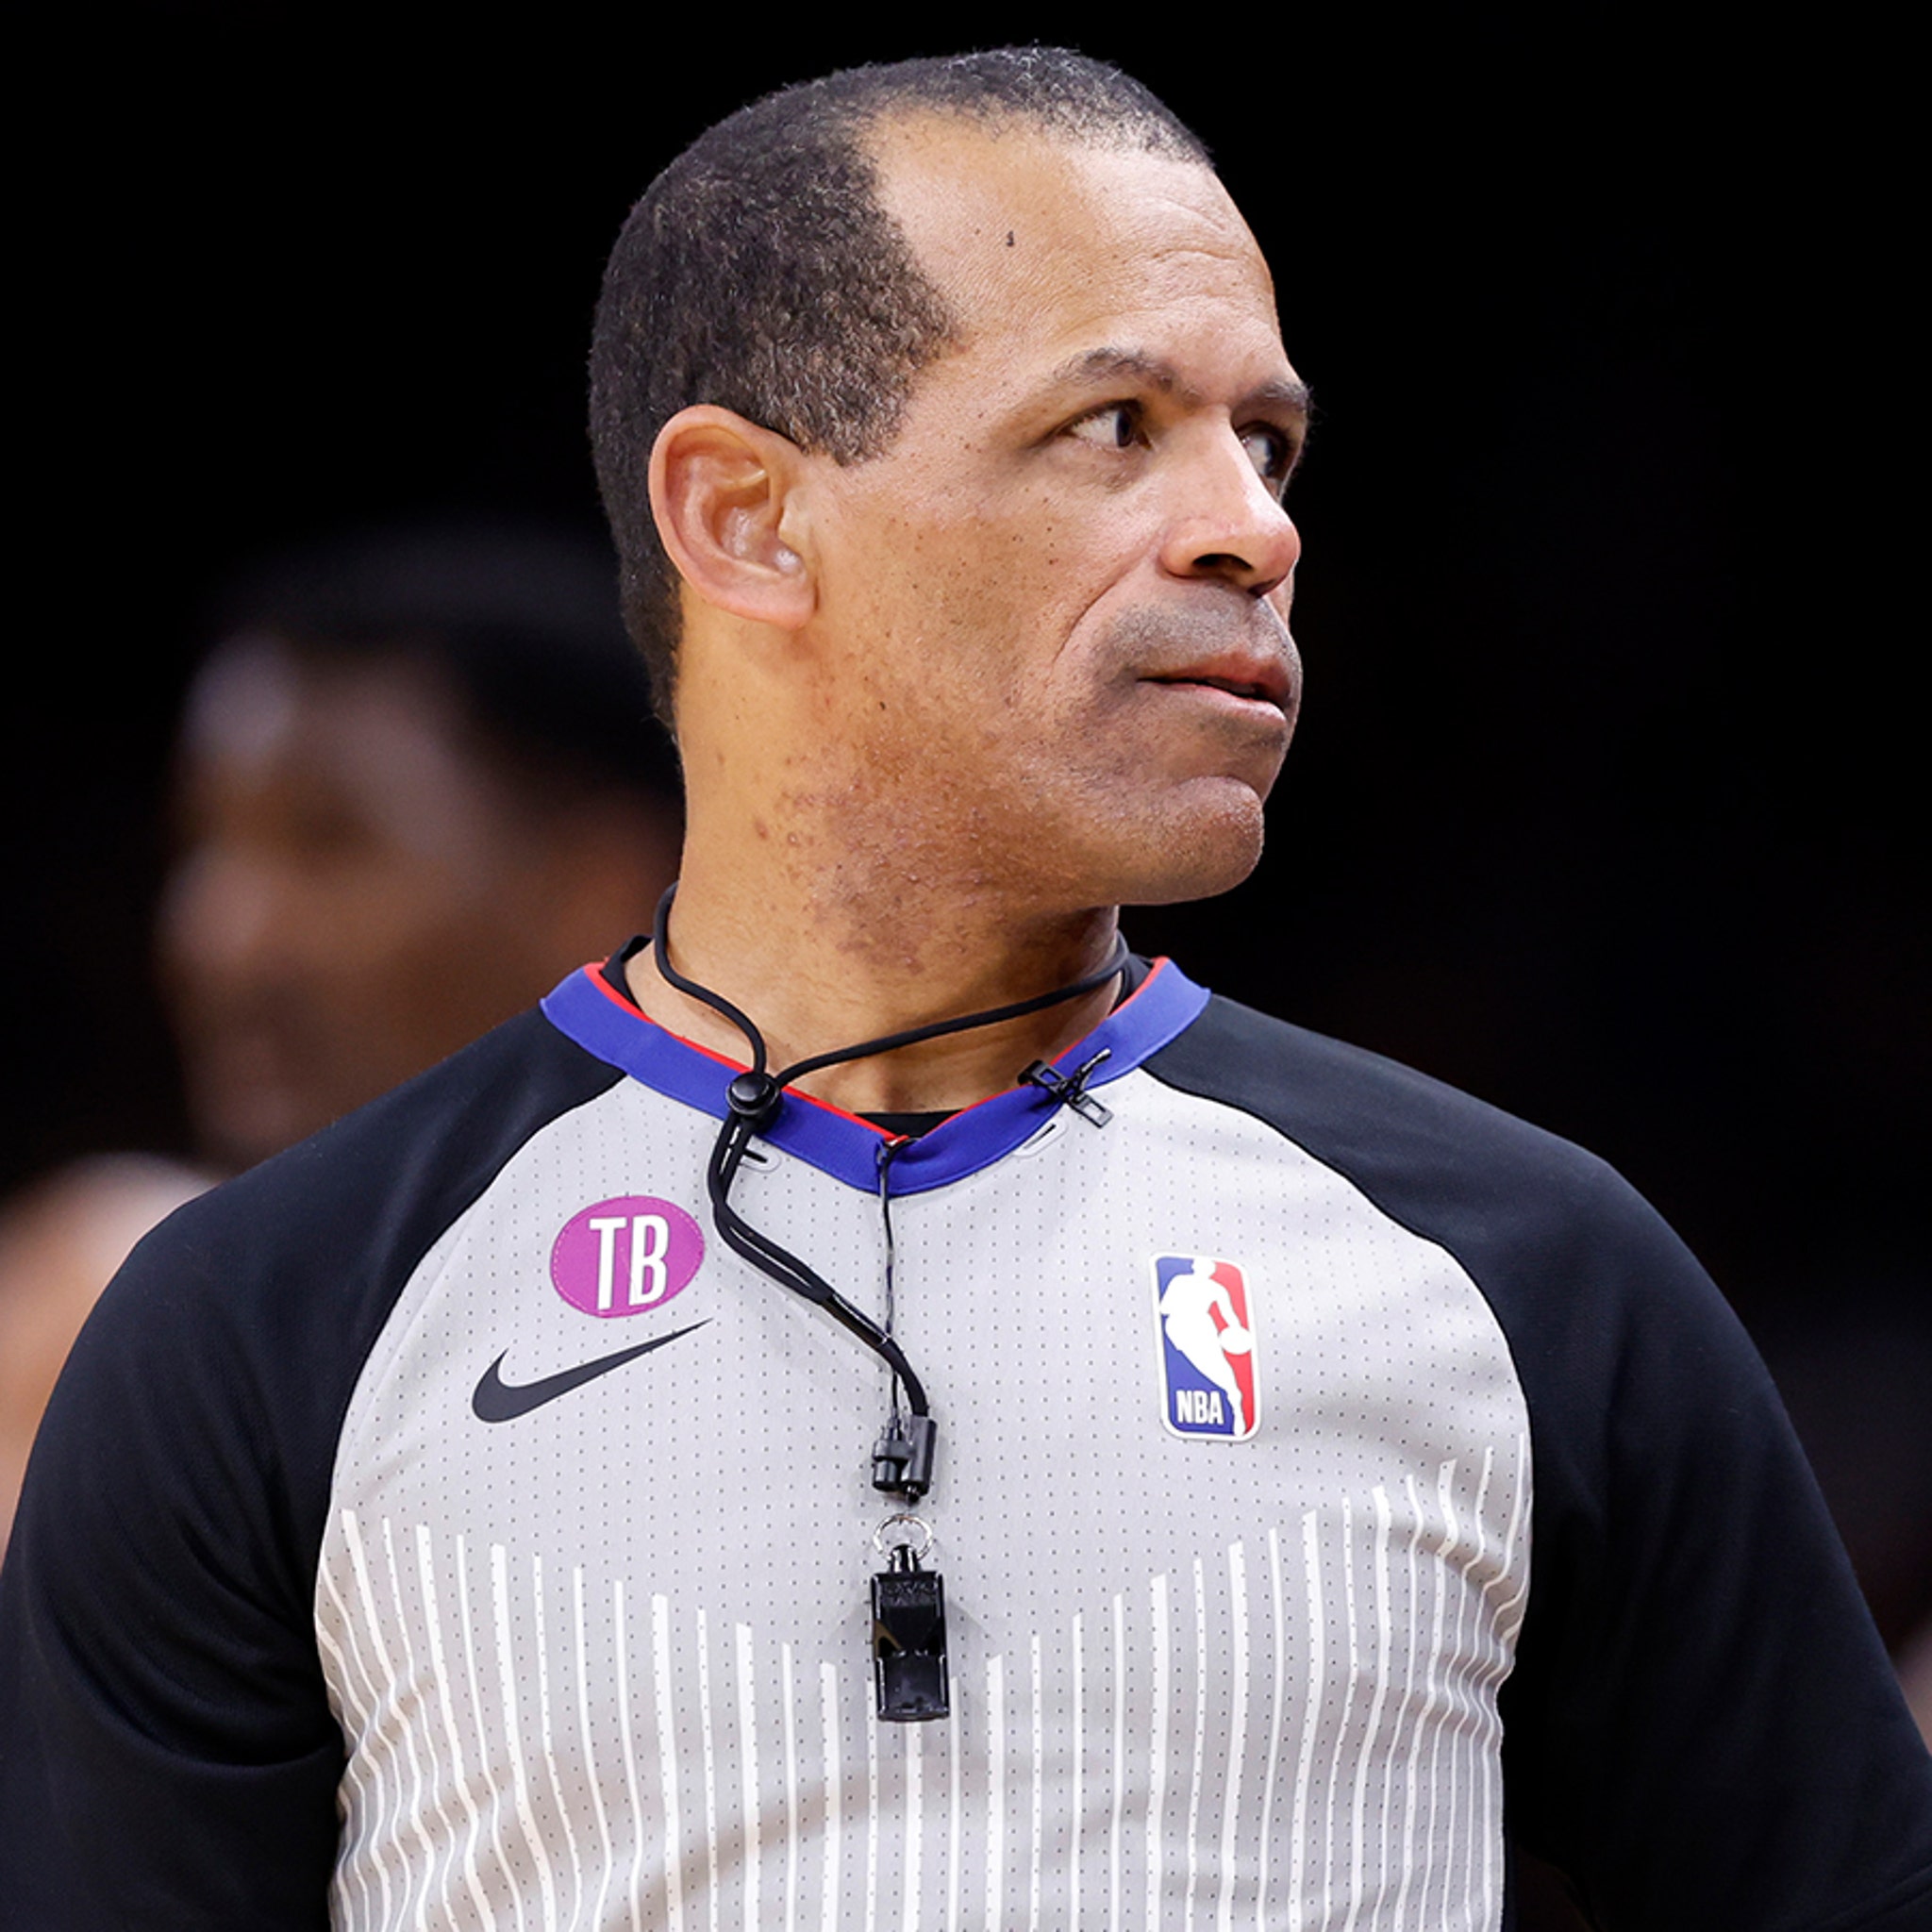 Referee Eric Lewis not selected to work NBA Finals while league